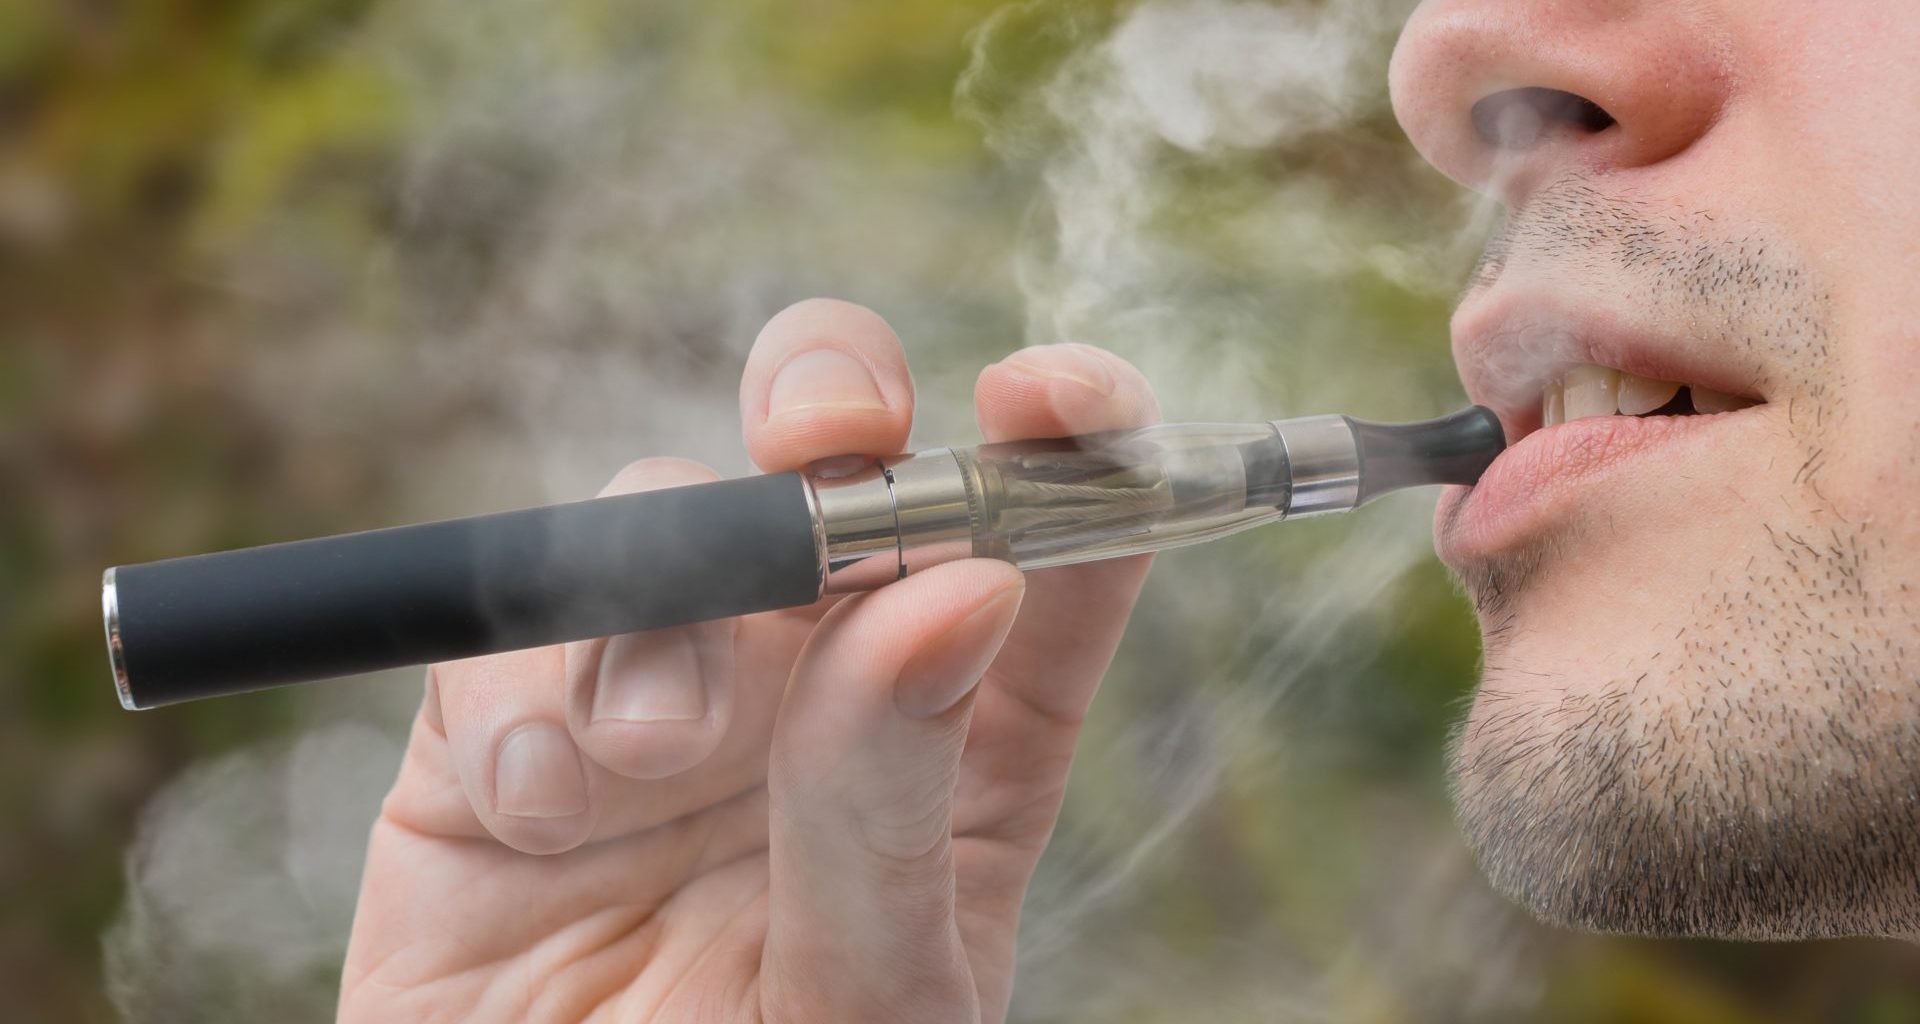 Facebook campaigns opposing anti-vaping laws prompt concern 5